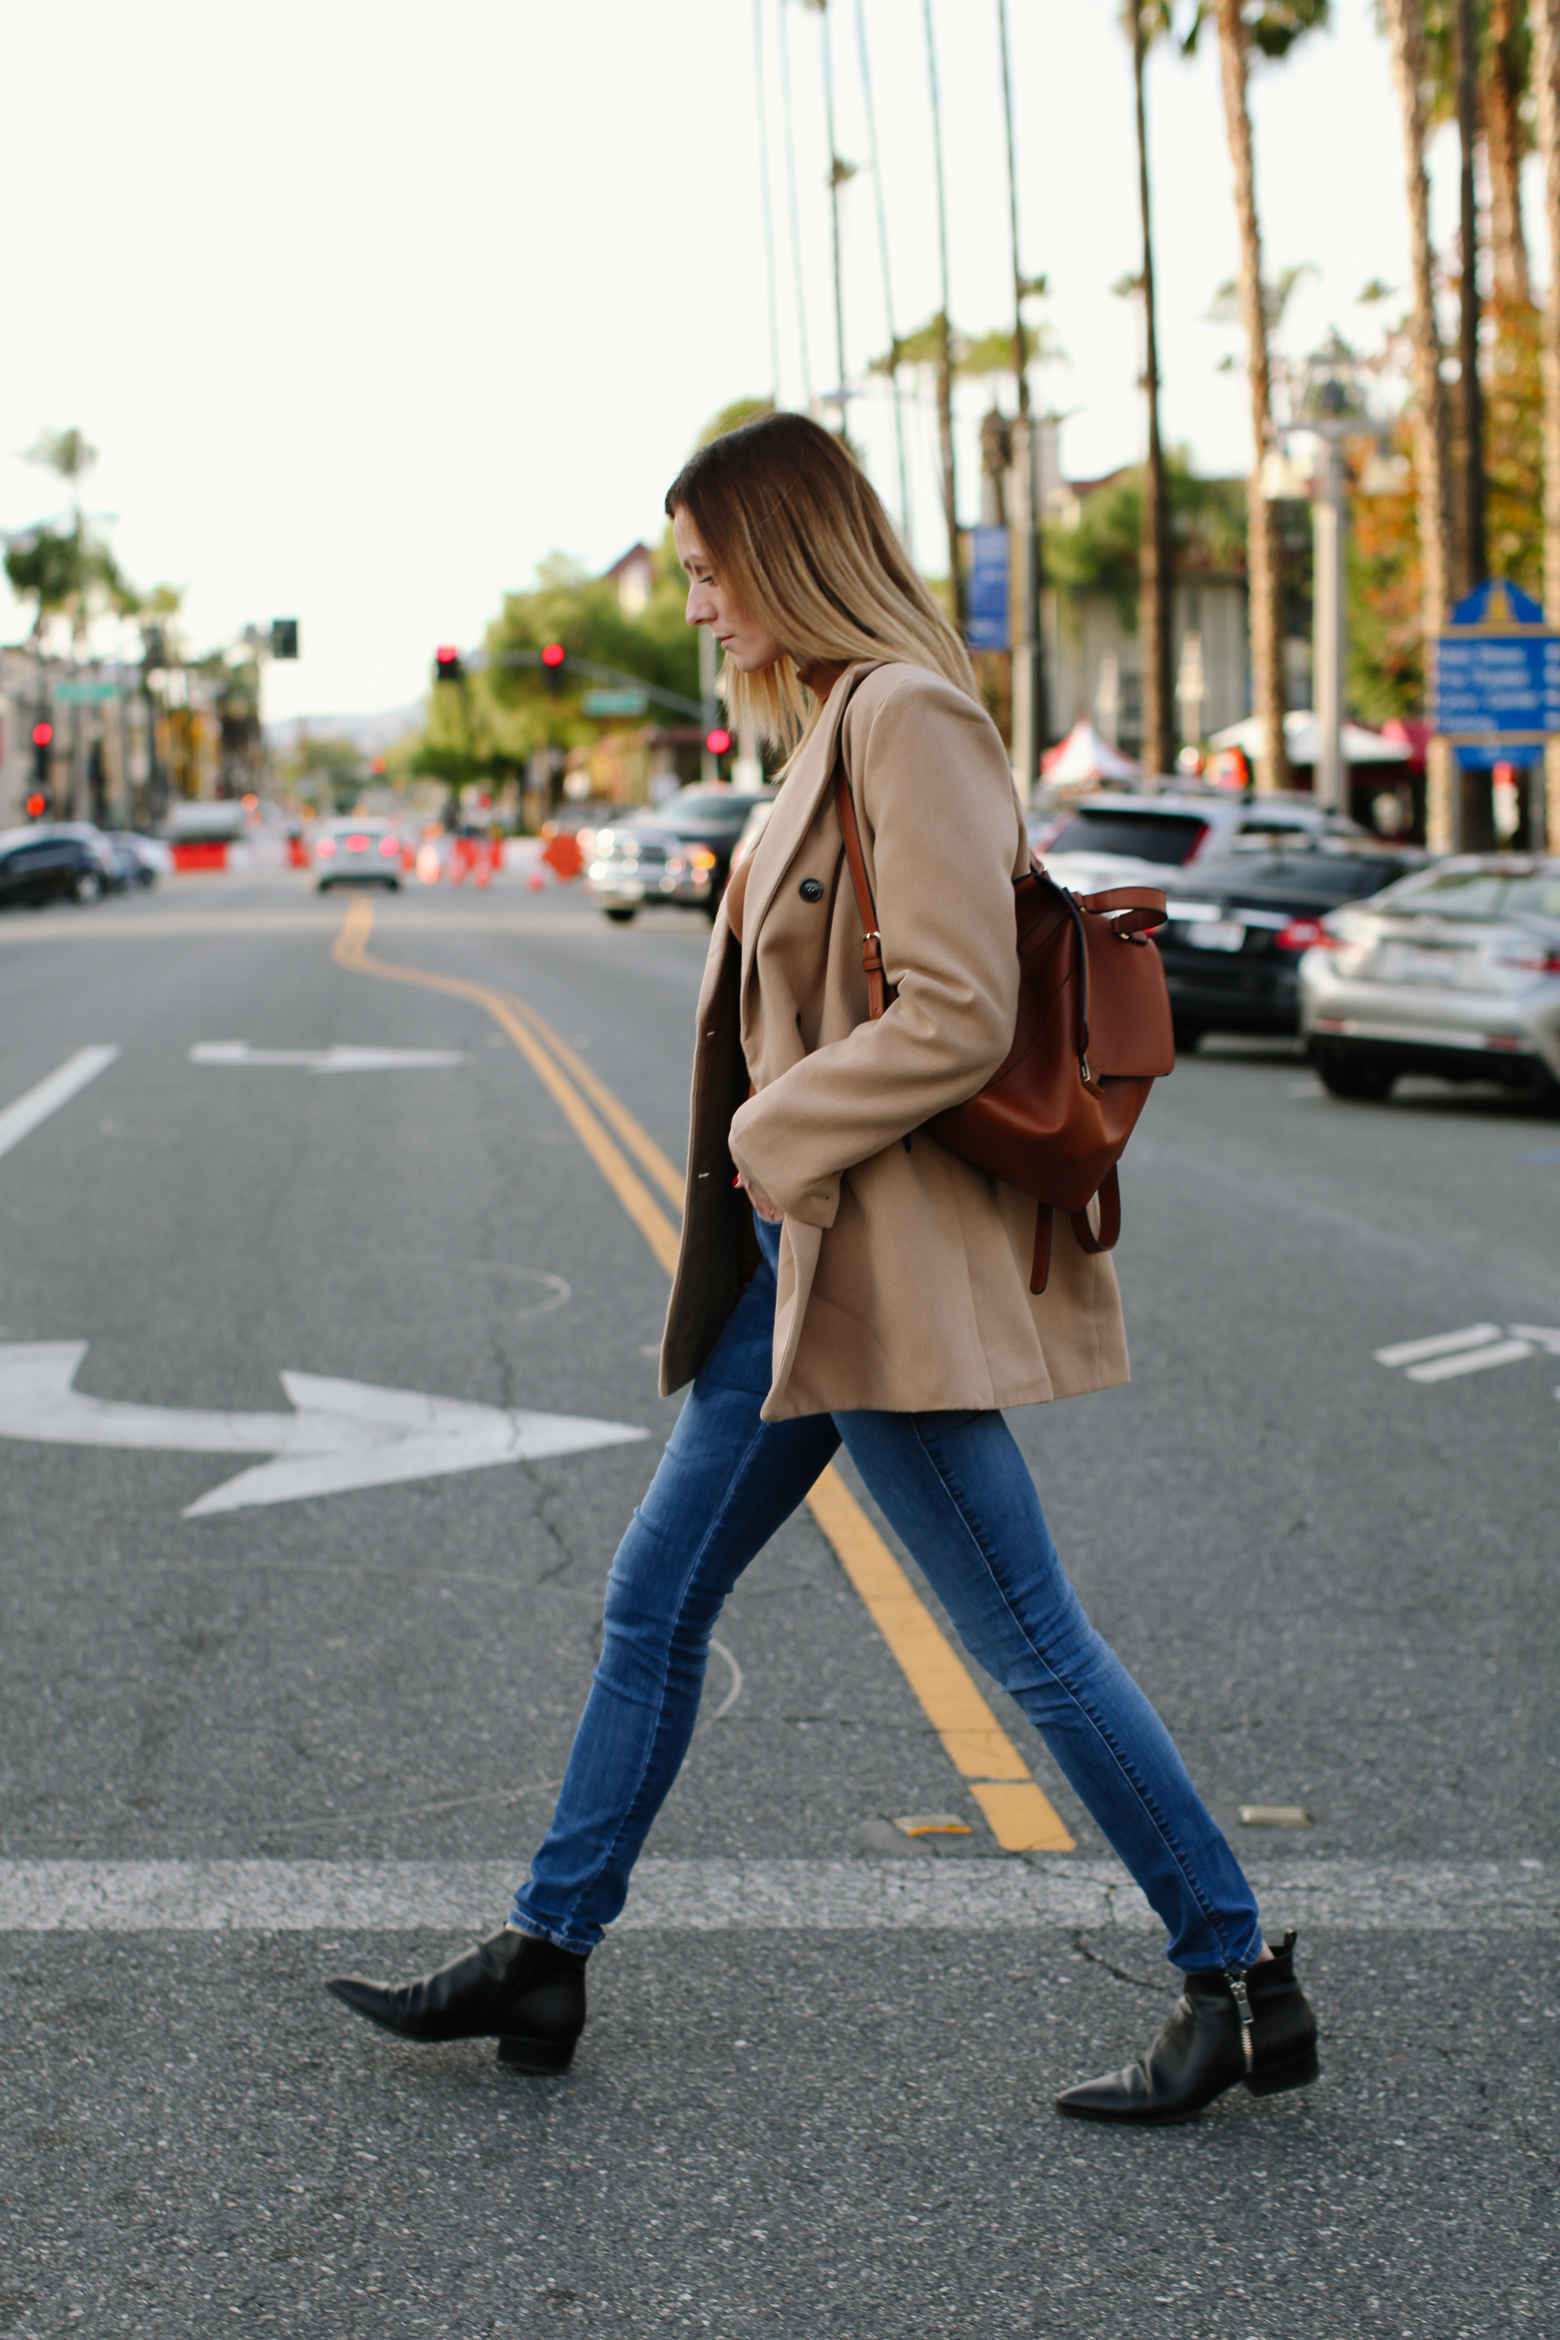 Affordable Camel Coat Picks Under $100 | Affordable Camel Coats by popular Los Angeles fashion blog, Tea Cups and Tulips: image of a woman wearing a SheIn Camel Double Breasted Coat With Welt Pocket, brown Target turtleneck, Diesel jeans, and Mango Zipped detail ankle boots.